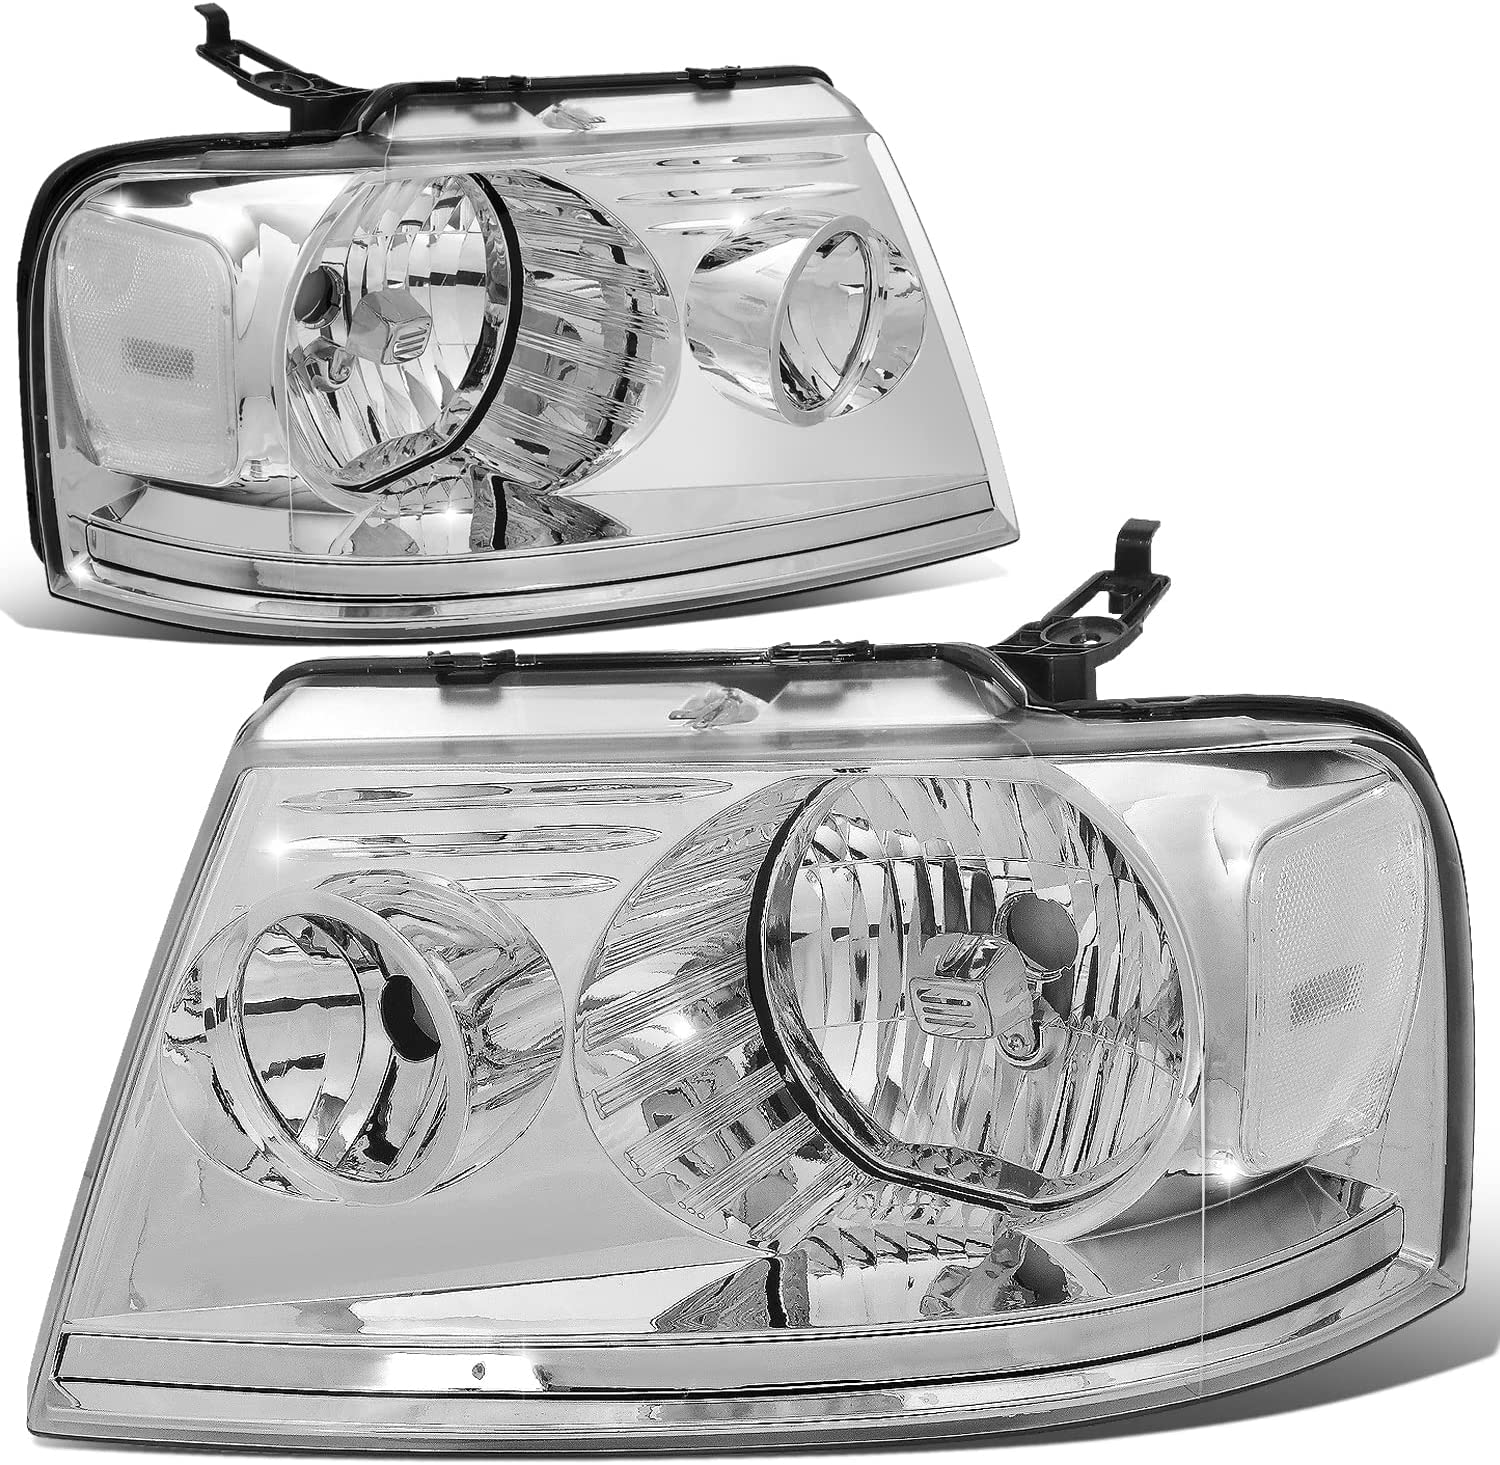 DNA Motoring HL-OH-F1504-CH-AM Headlight Assembly - Driver and